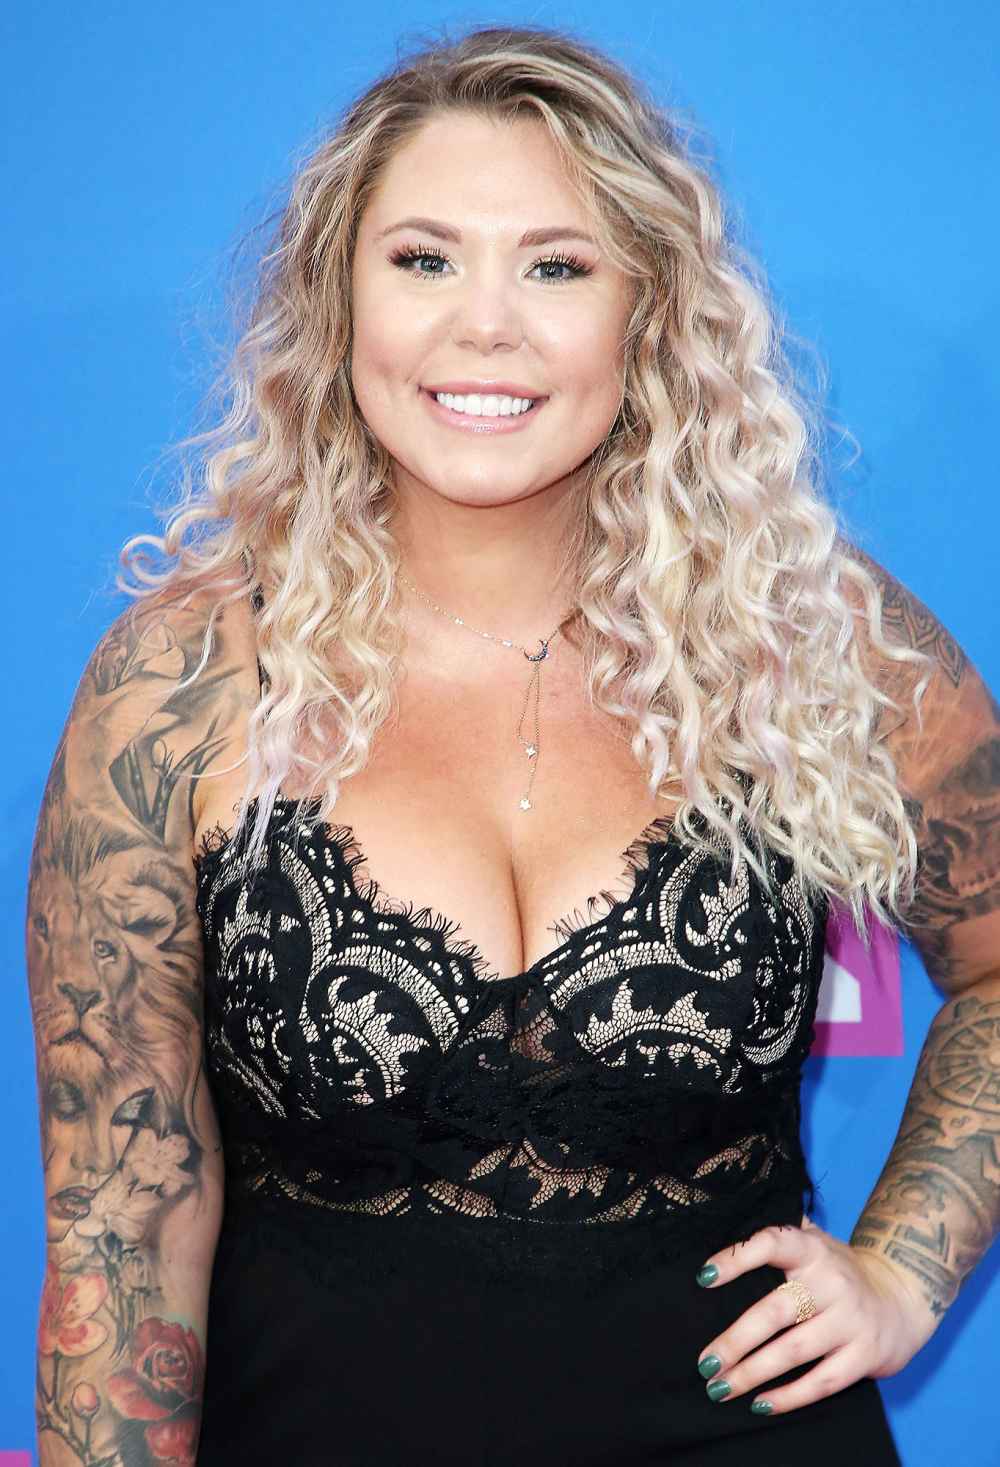 Kailyn Lowry attends the MTV Video Music Awards Kailyn Lowry Is Still Struggling With Morning Sickness